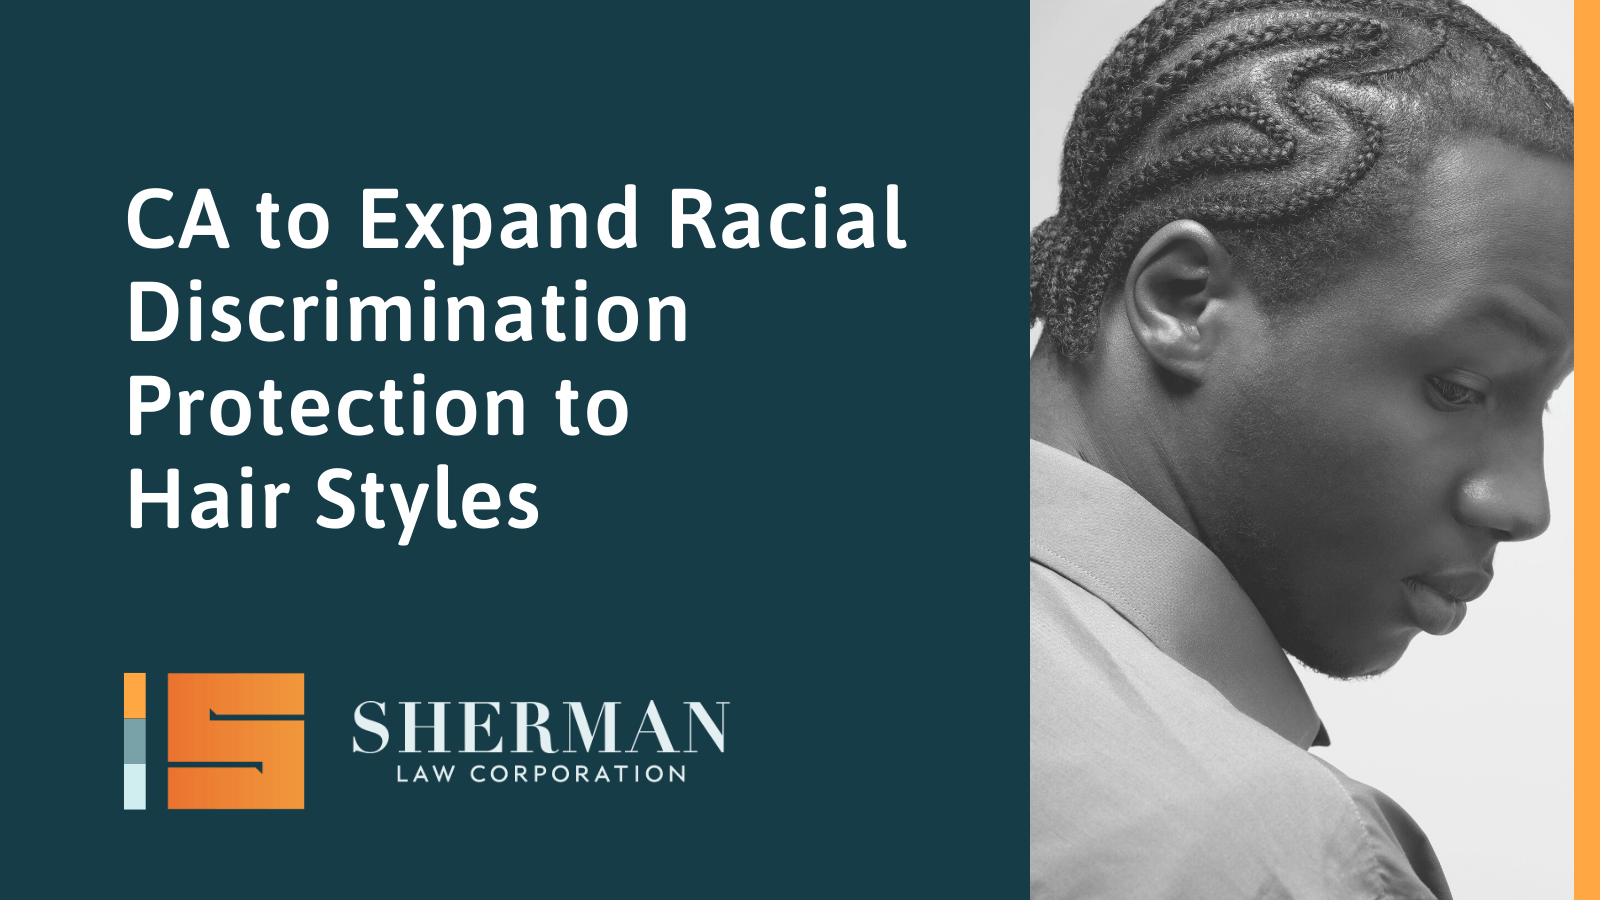 CA to Expand Racial Discrimination Protection to Hair Styles- california employment lawyer - sherman law corporation